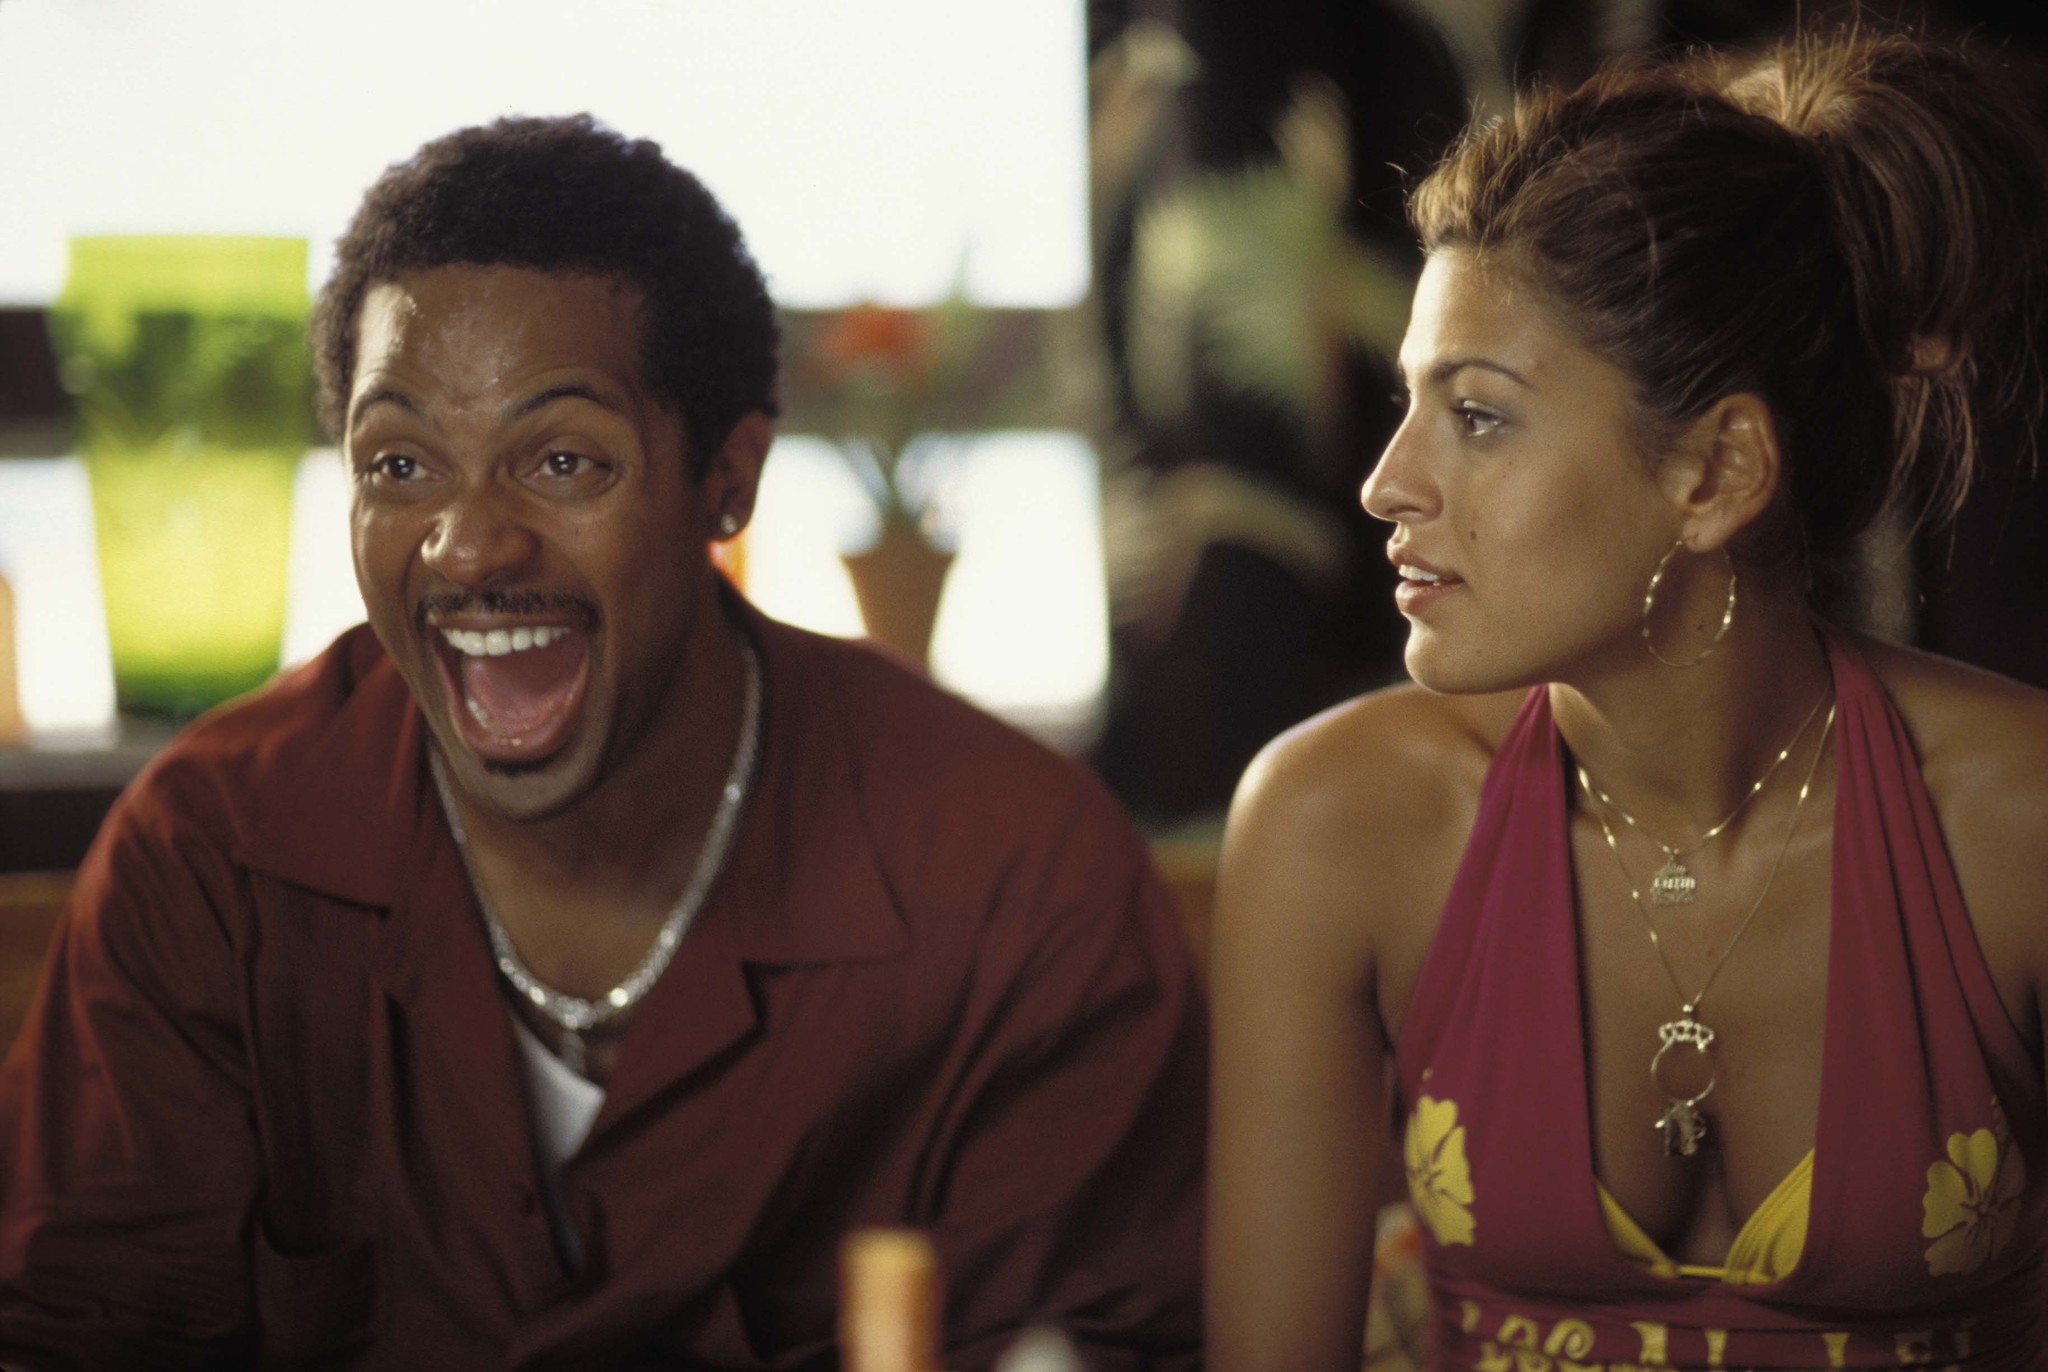 Still of Mike Epps and Eva Mendes in All About the Benjamins (2002)